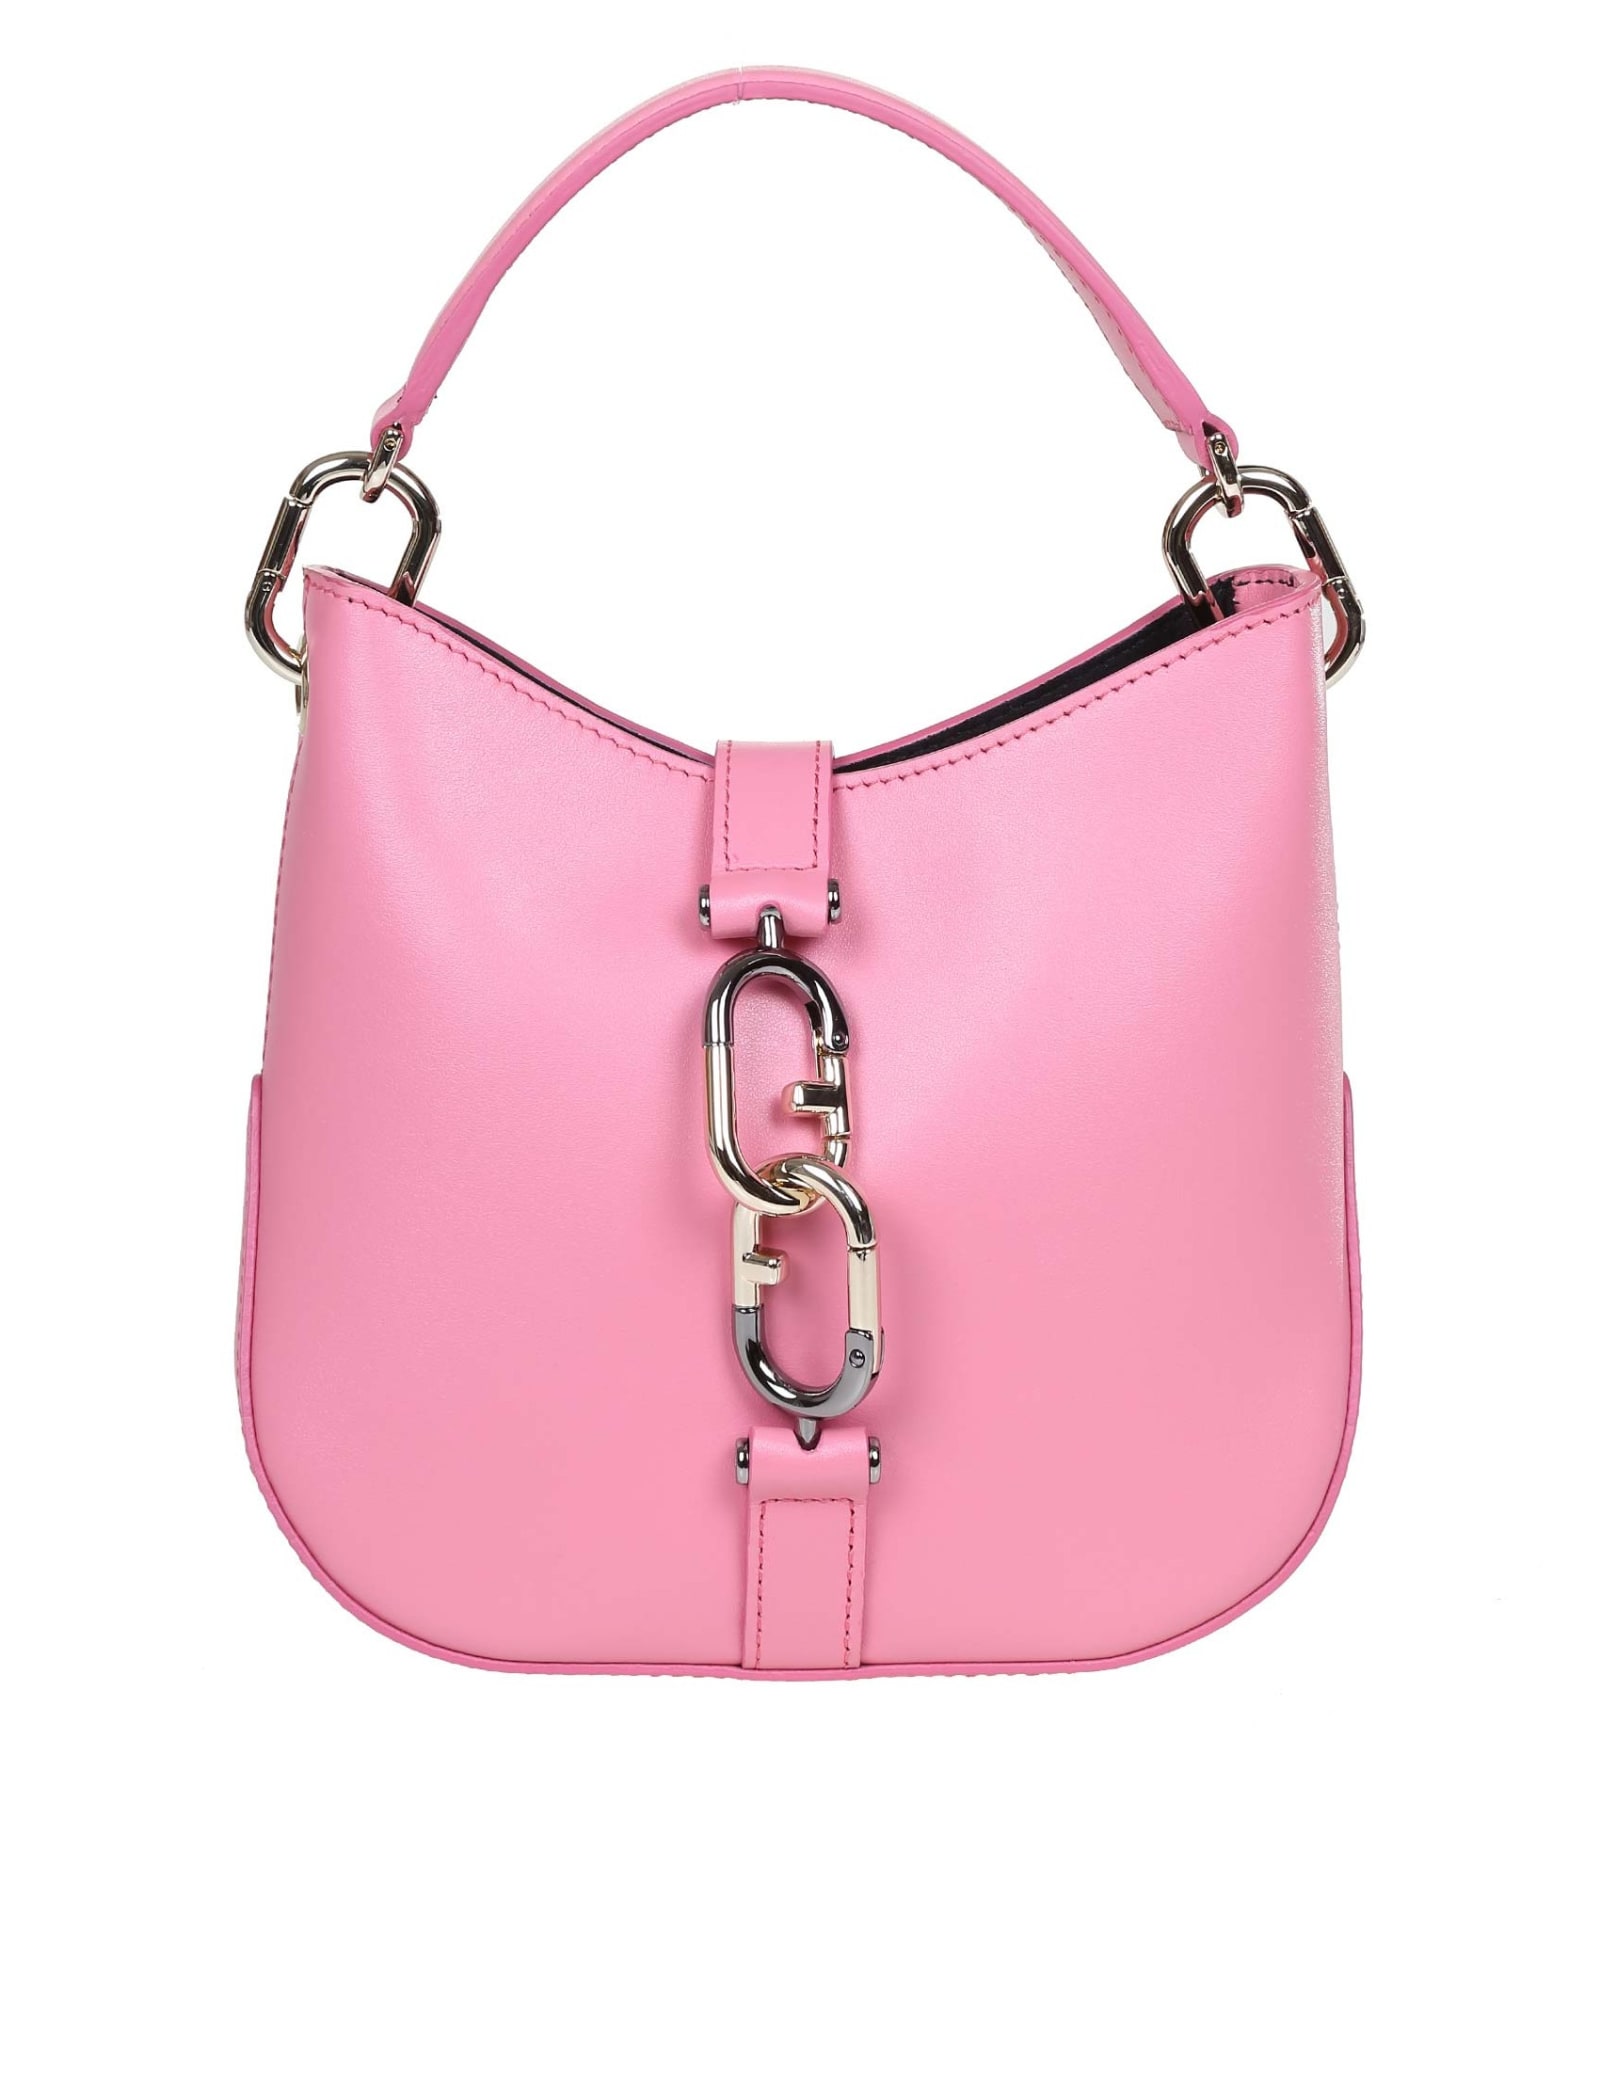 Furla M Siren Bag In Pink Color Leather